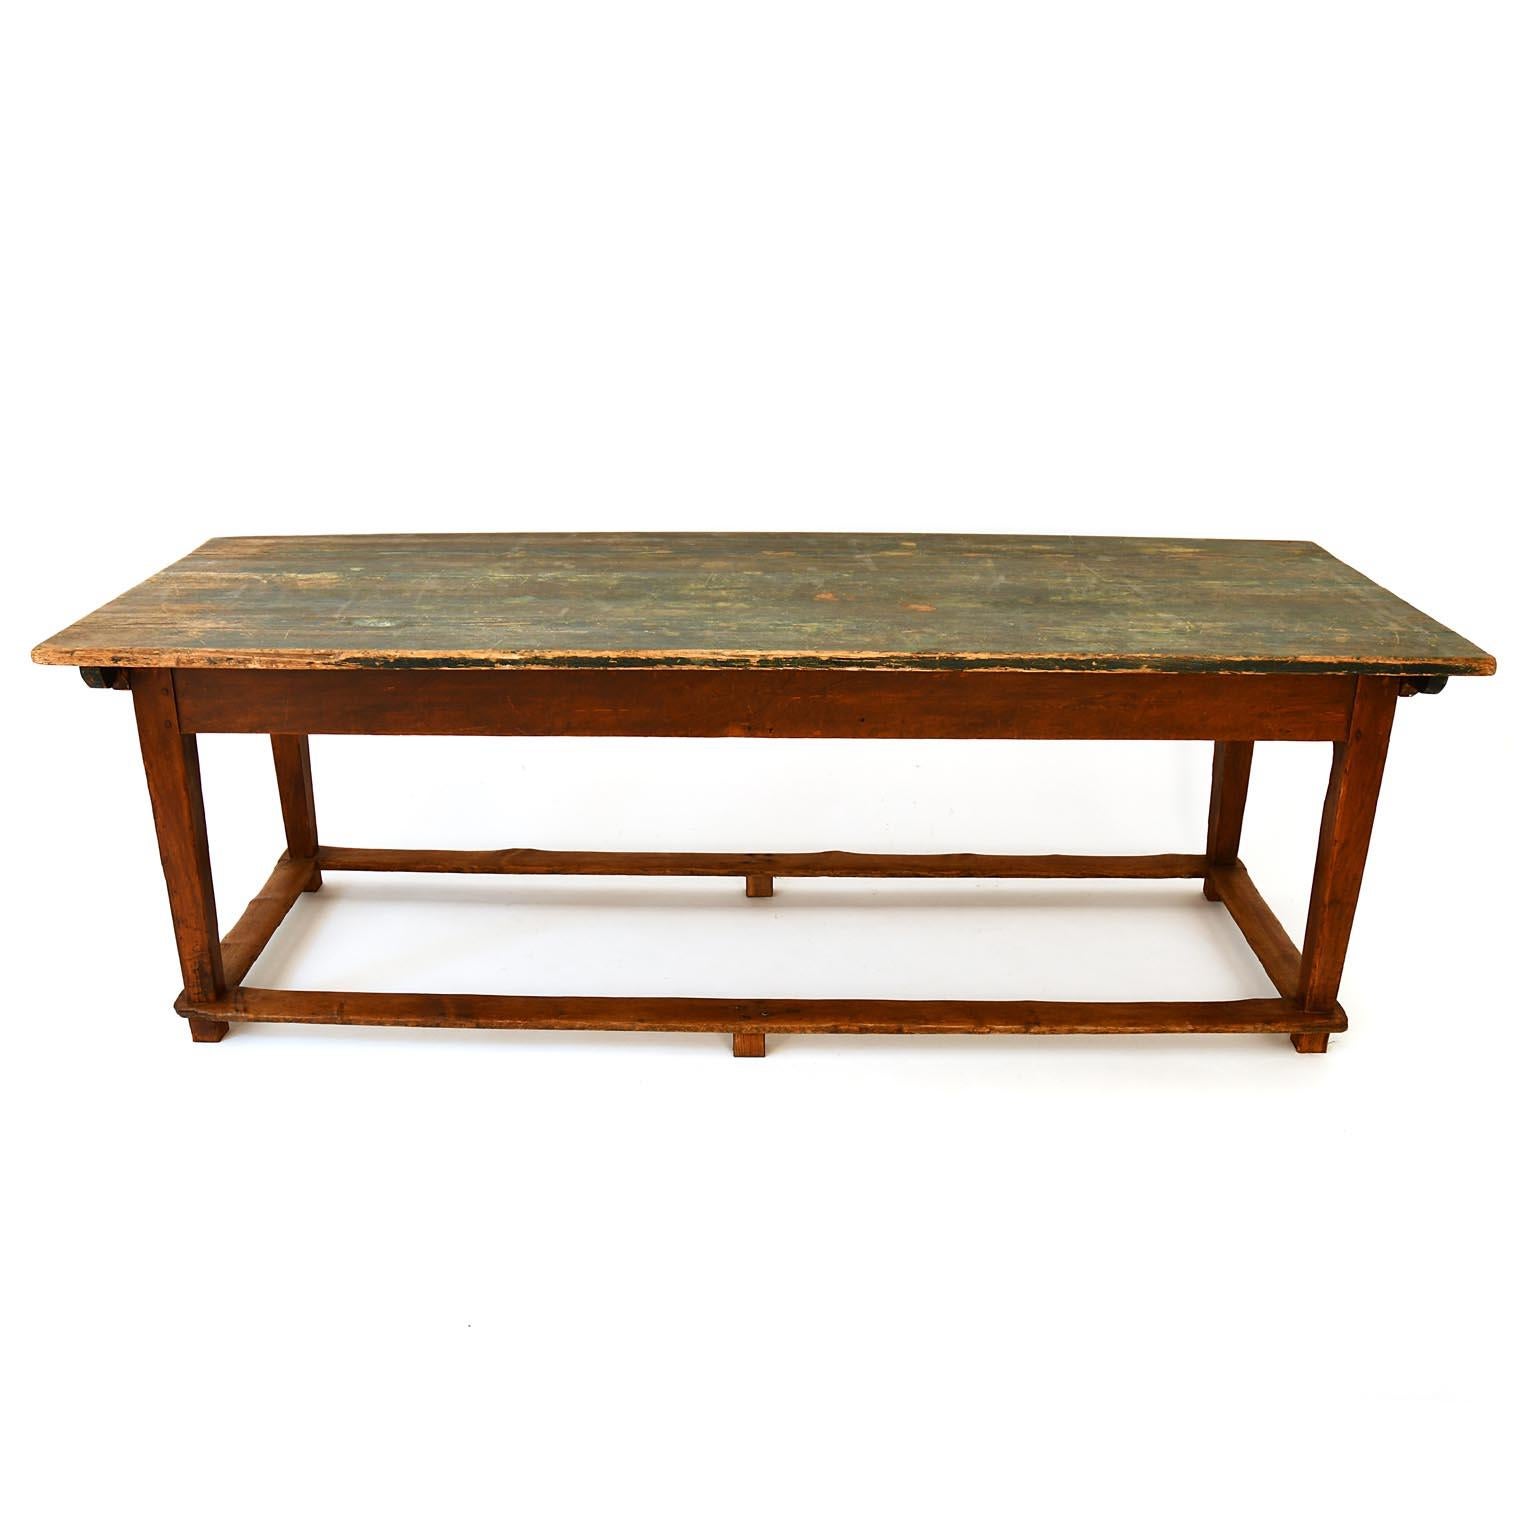 Stained Refectory Table Softwood Top with Green Patina Early 20th Century France For Sale